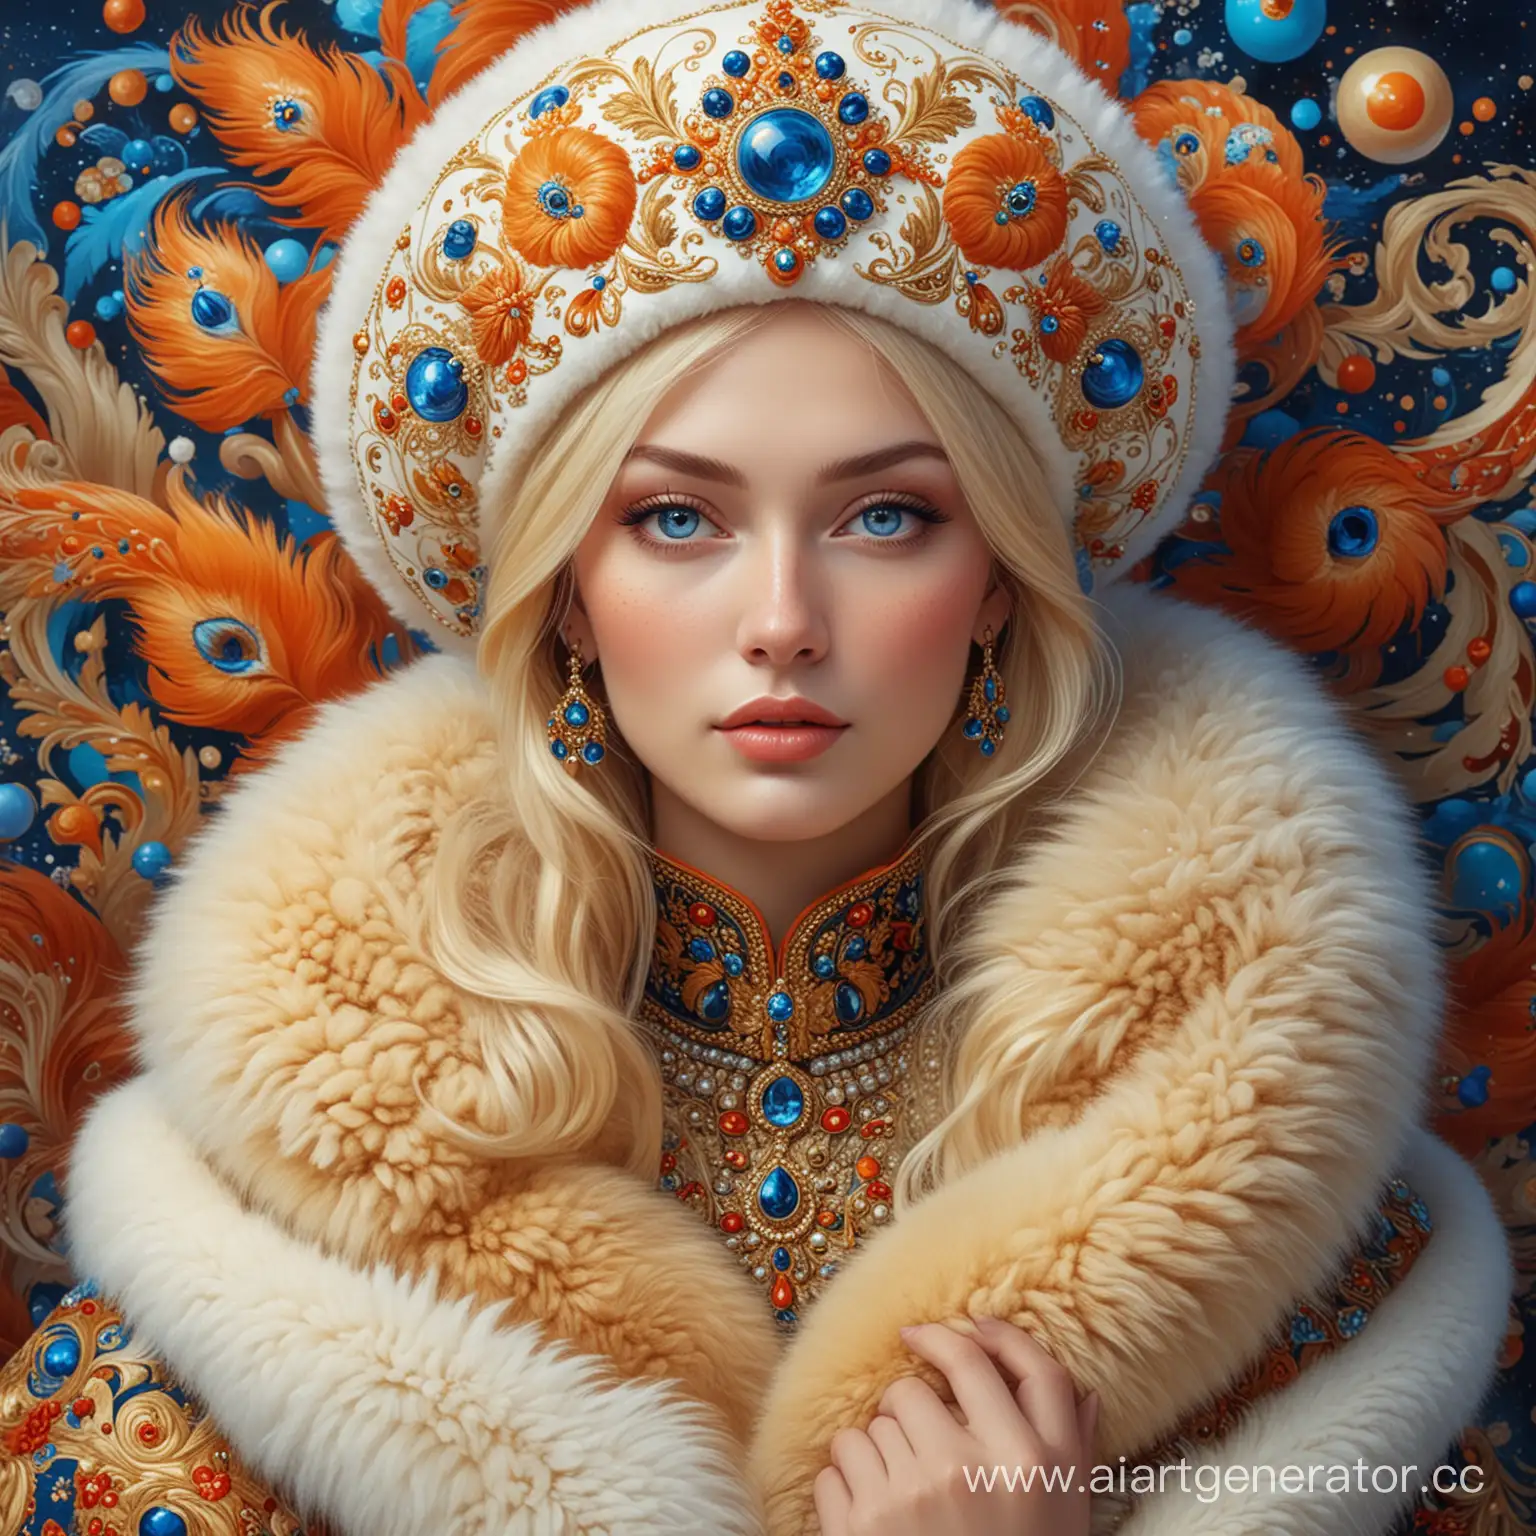 Luxurious-Russian-Girl-Goddess-with-Khokhloma-Patterns-and-Swirling-Colors